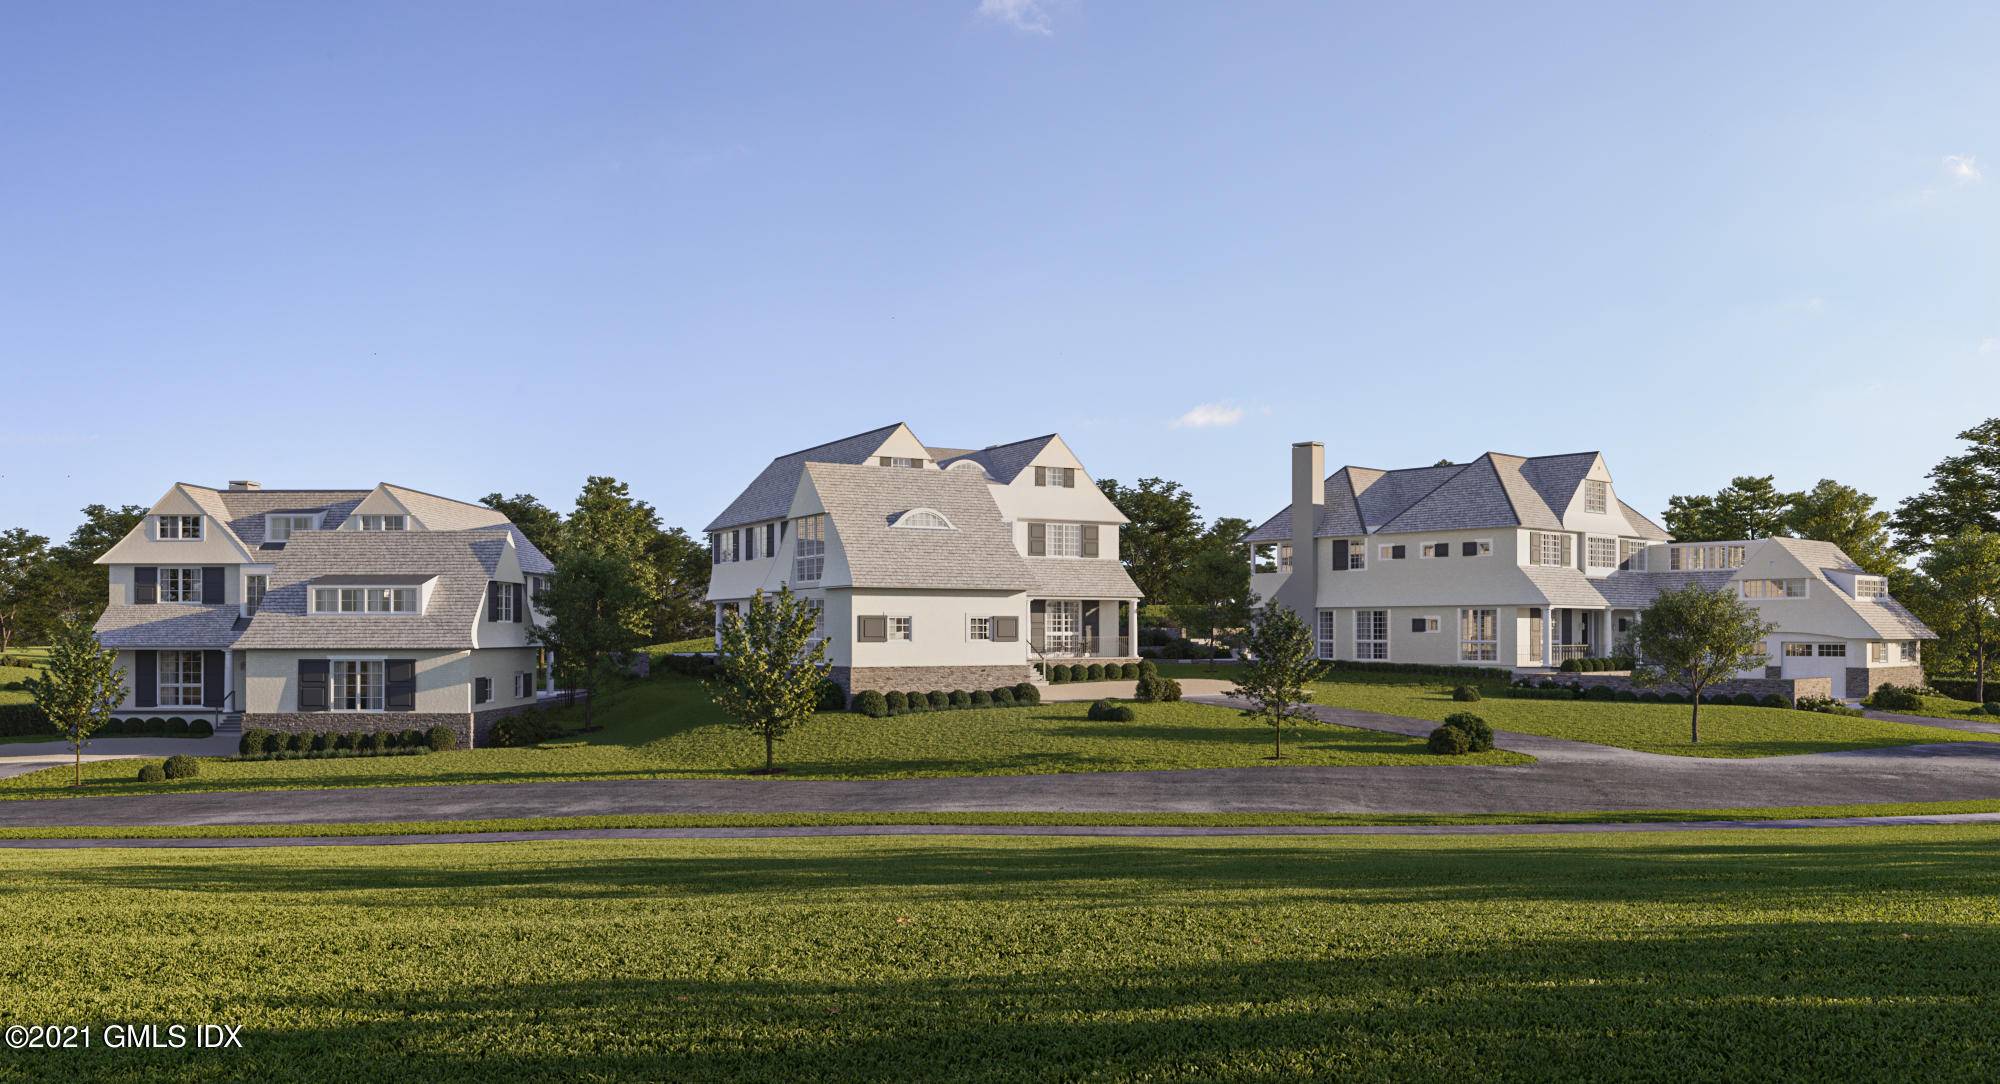 An incredible opportunity to build your dream home in one of Greenwich, Connecticut's newest luxury developments directly across from coveted Bruce Park.